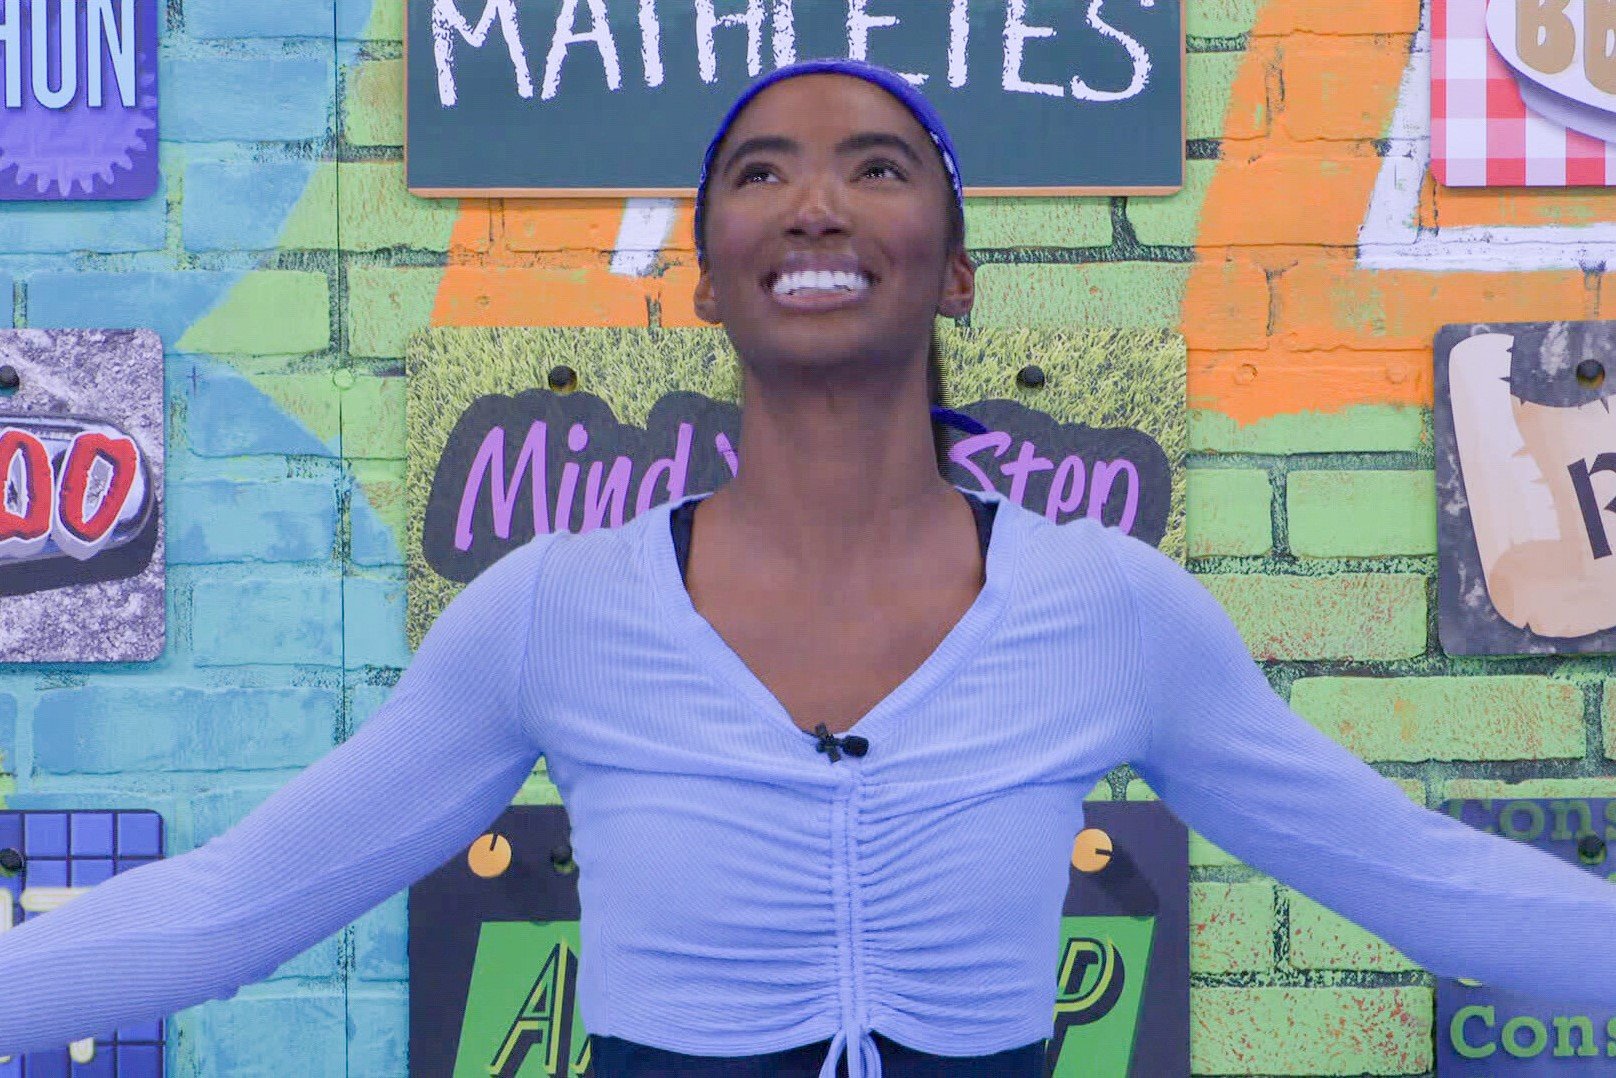 Taylor Hale, who won 'Big Brother 24' on CBS, wears a light blue long-sleeved cropped shirt.